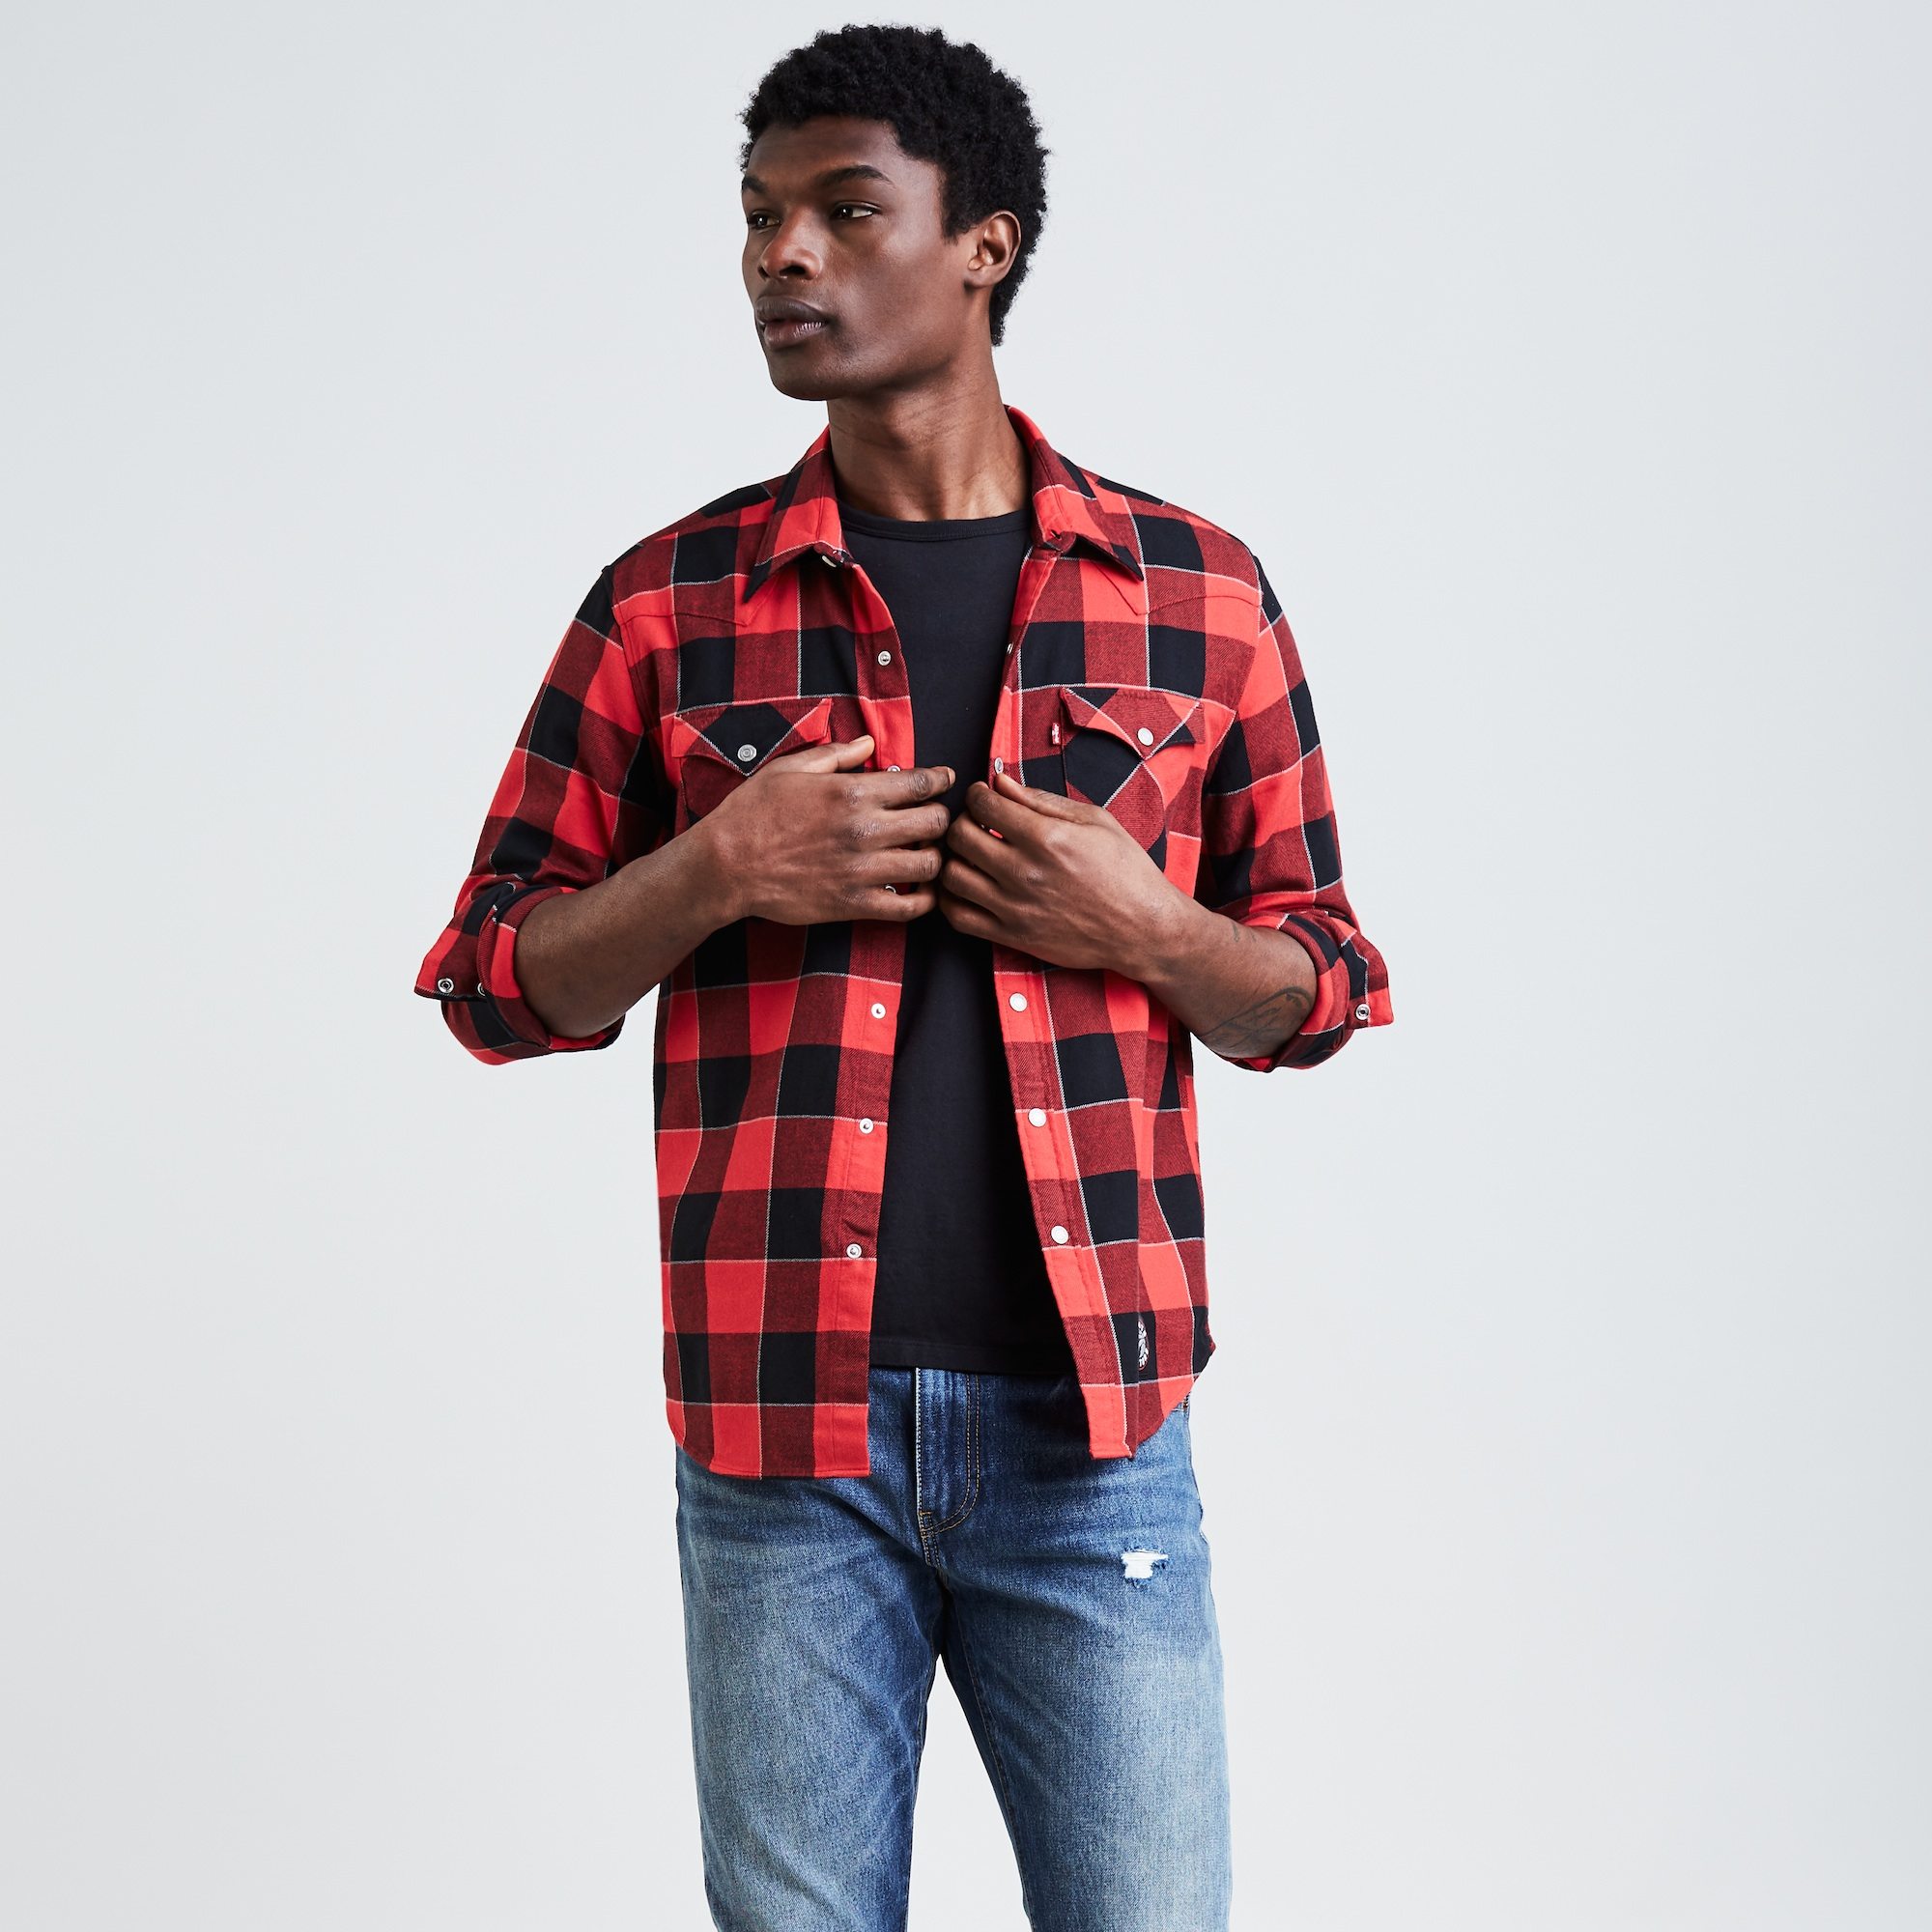 Levi's Just Added the Toronto Raptors to its NBA Collection - FASHION ...